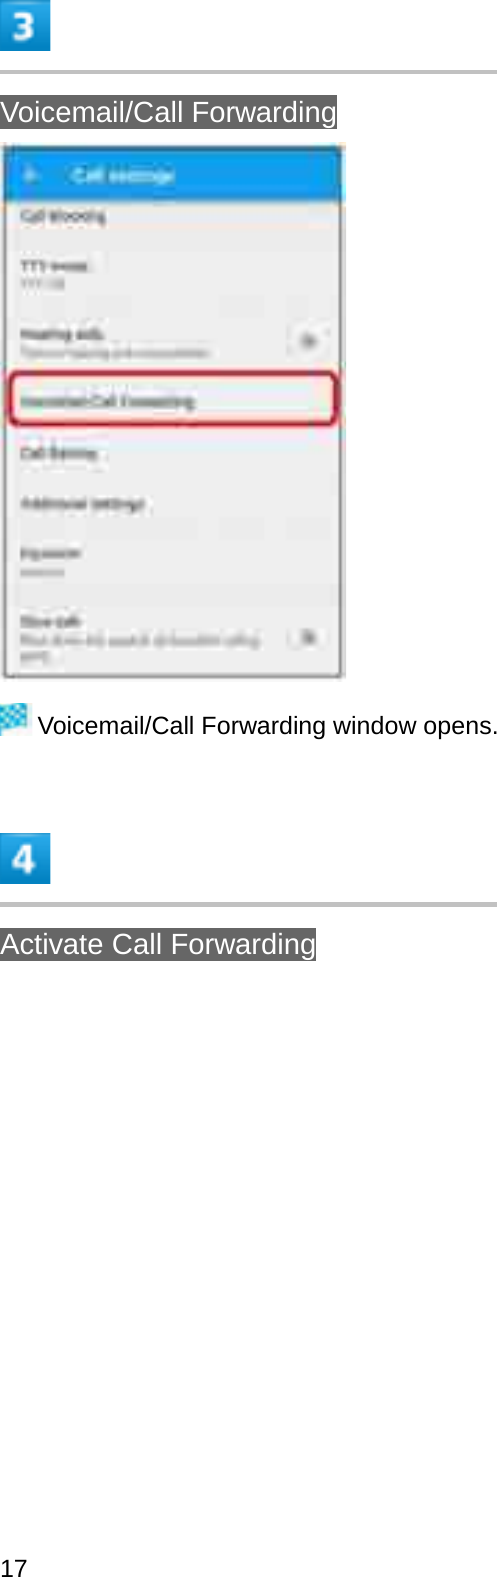 Voicemail/Call ForwardingVoicemail/Call Forwarding window opens.Activate Call Forwarding17